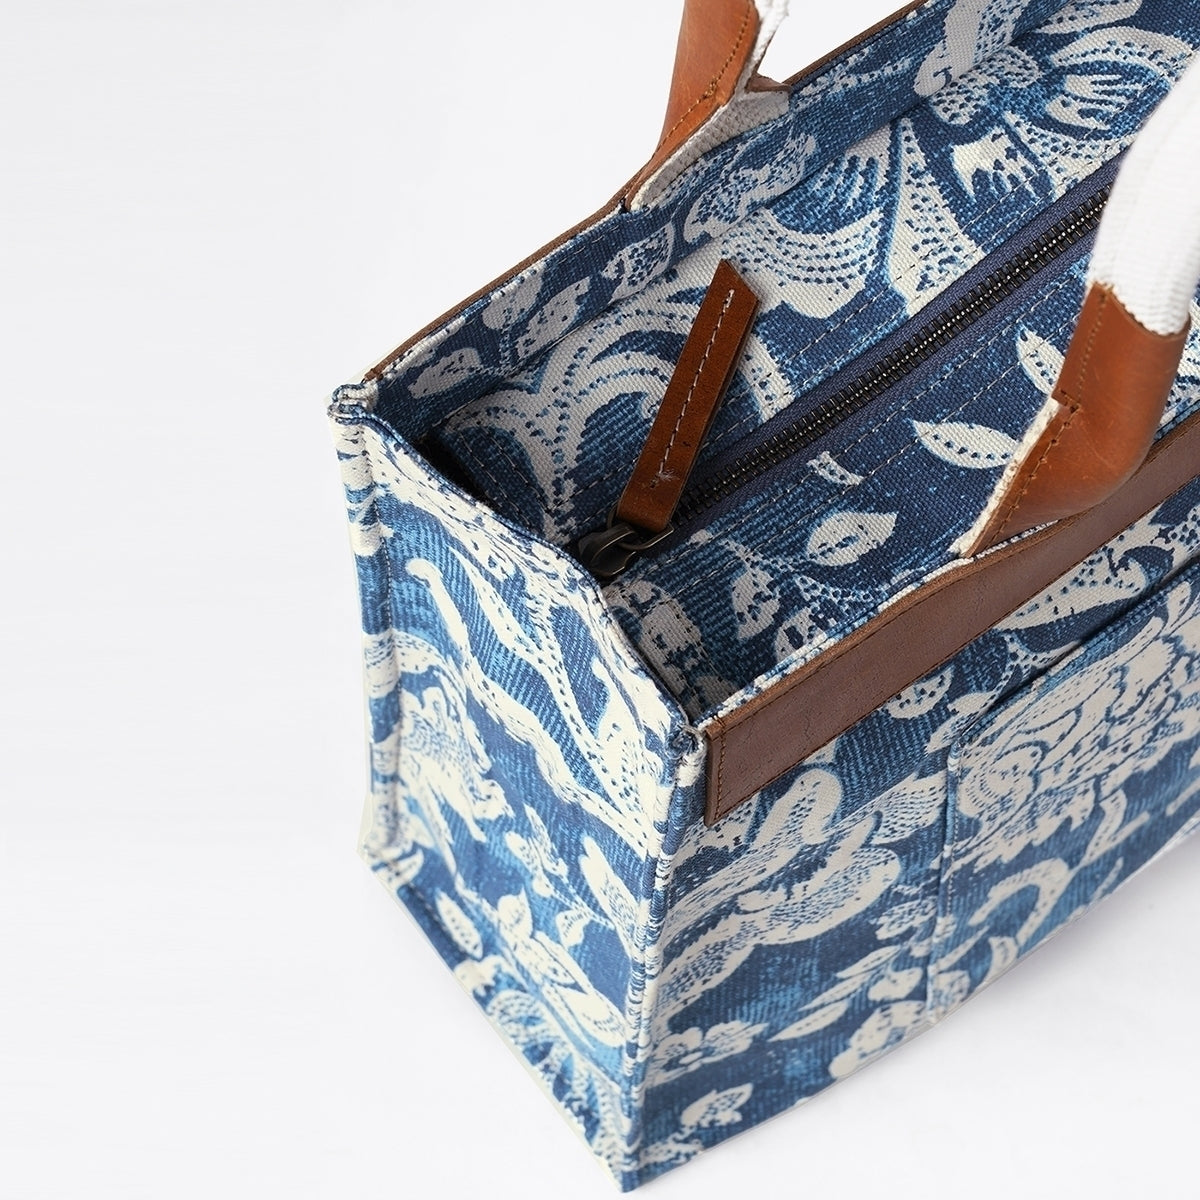 Indigo Dominoterie print cotton and leather tote bag, large tote, shoulder bag